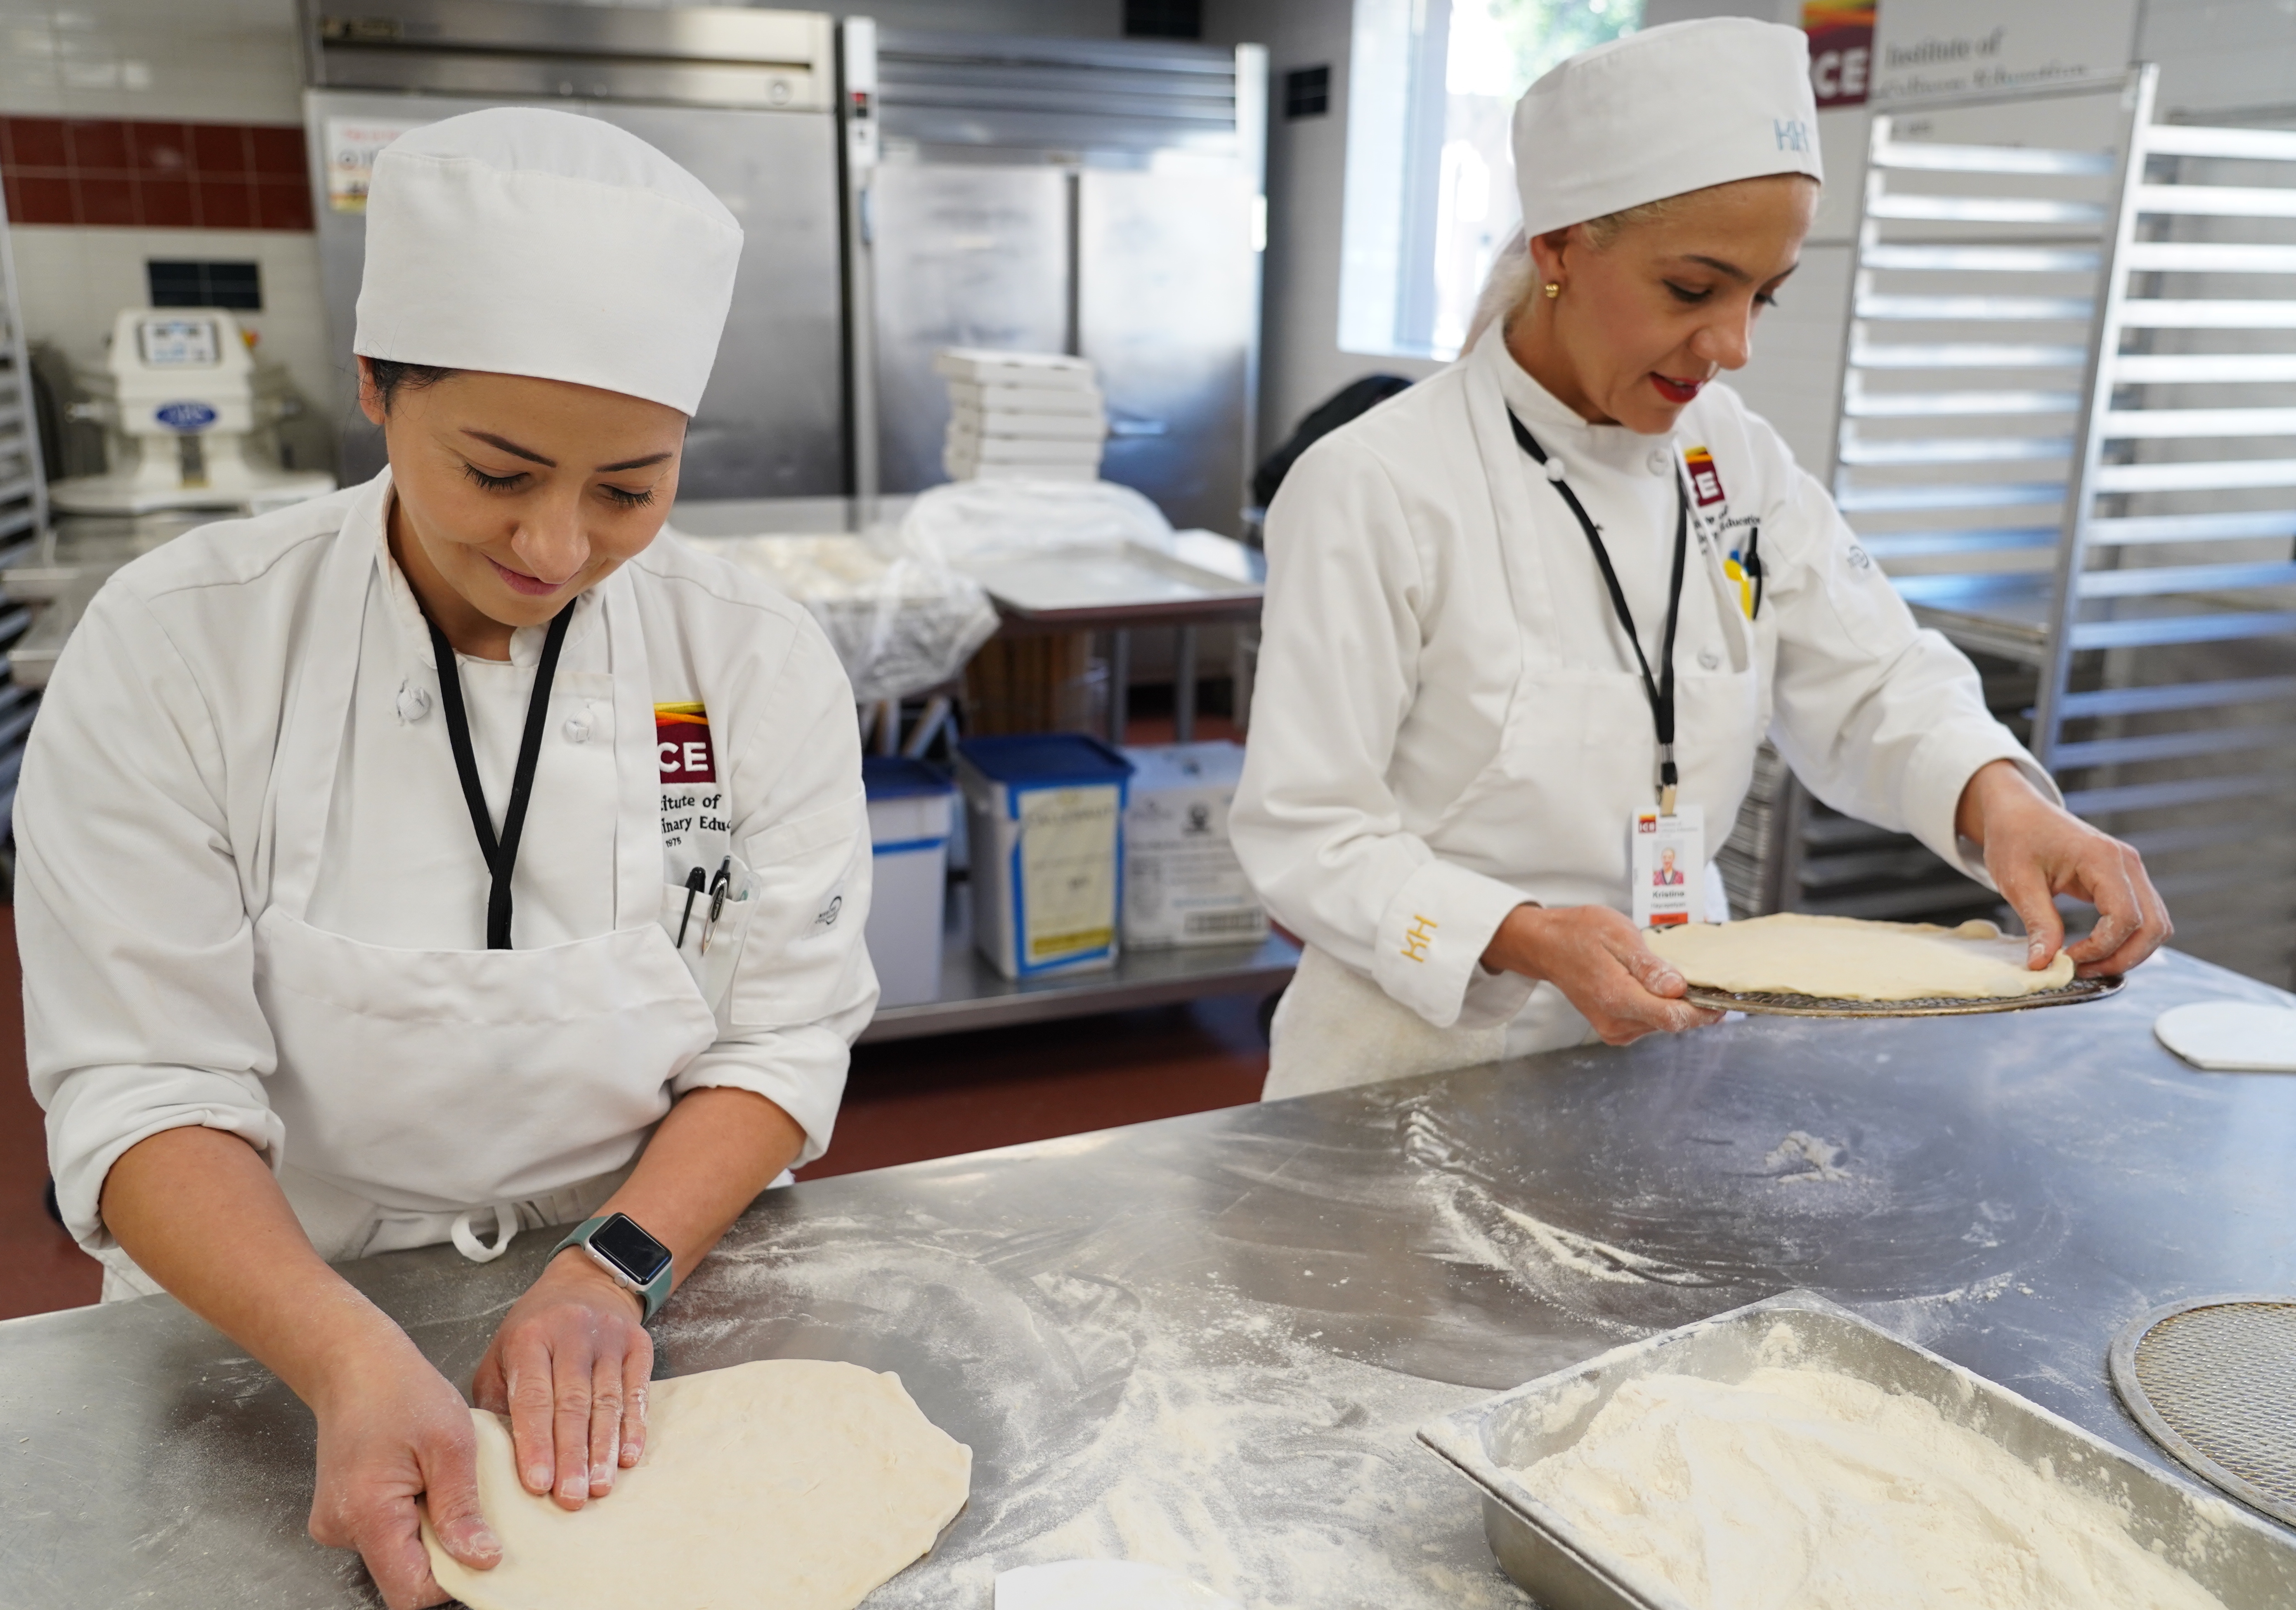 Two ICE students shape pizza dough on a metal table